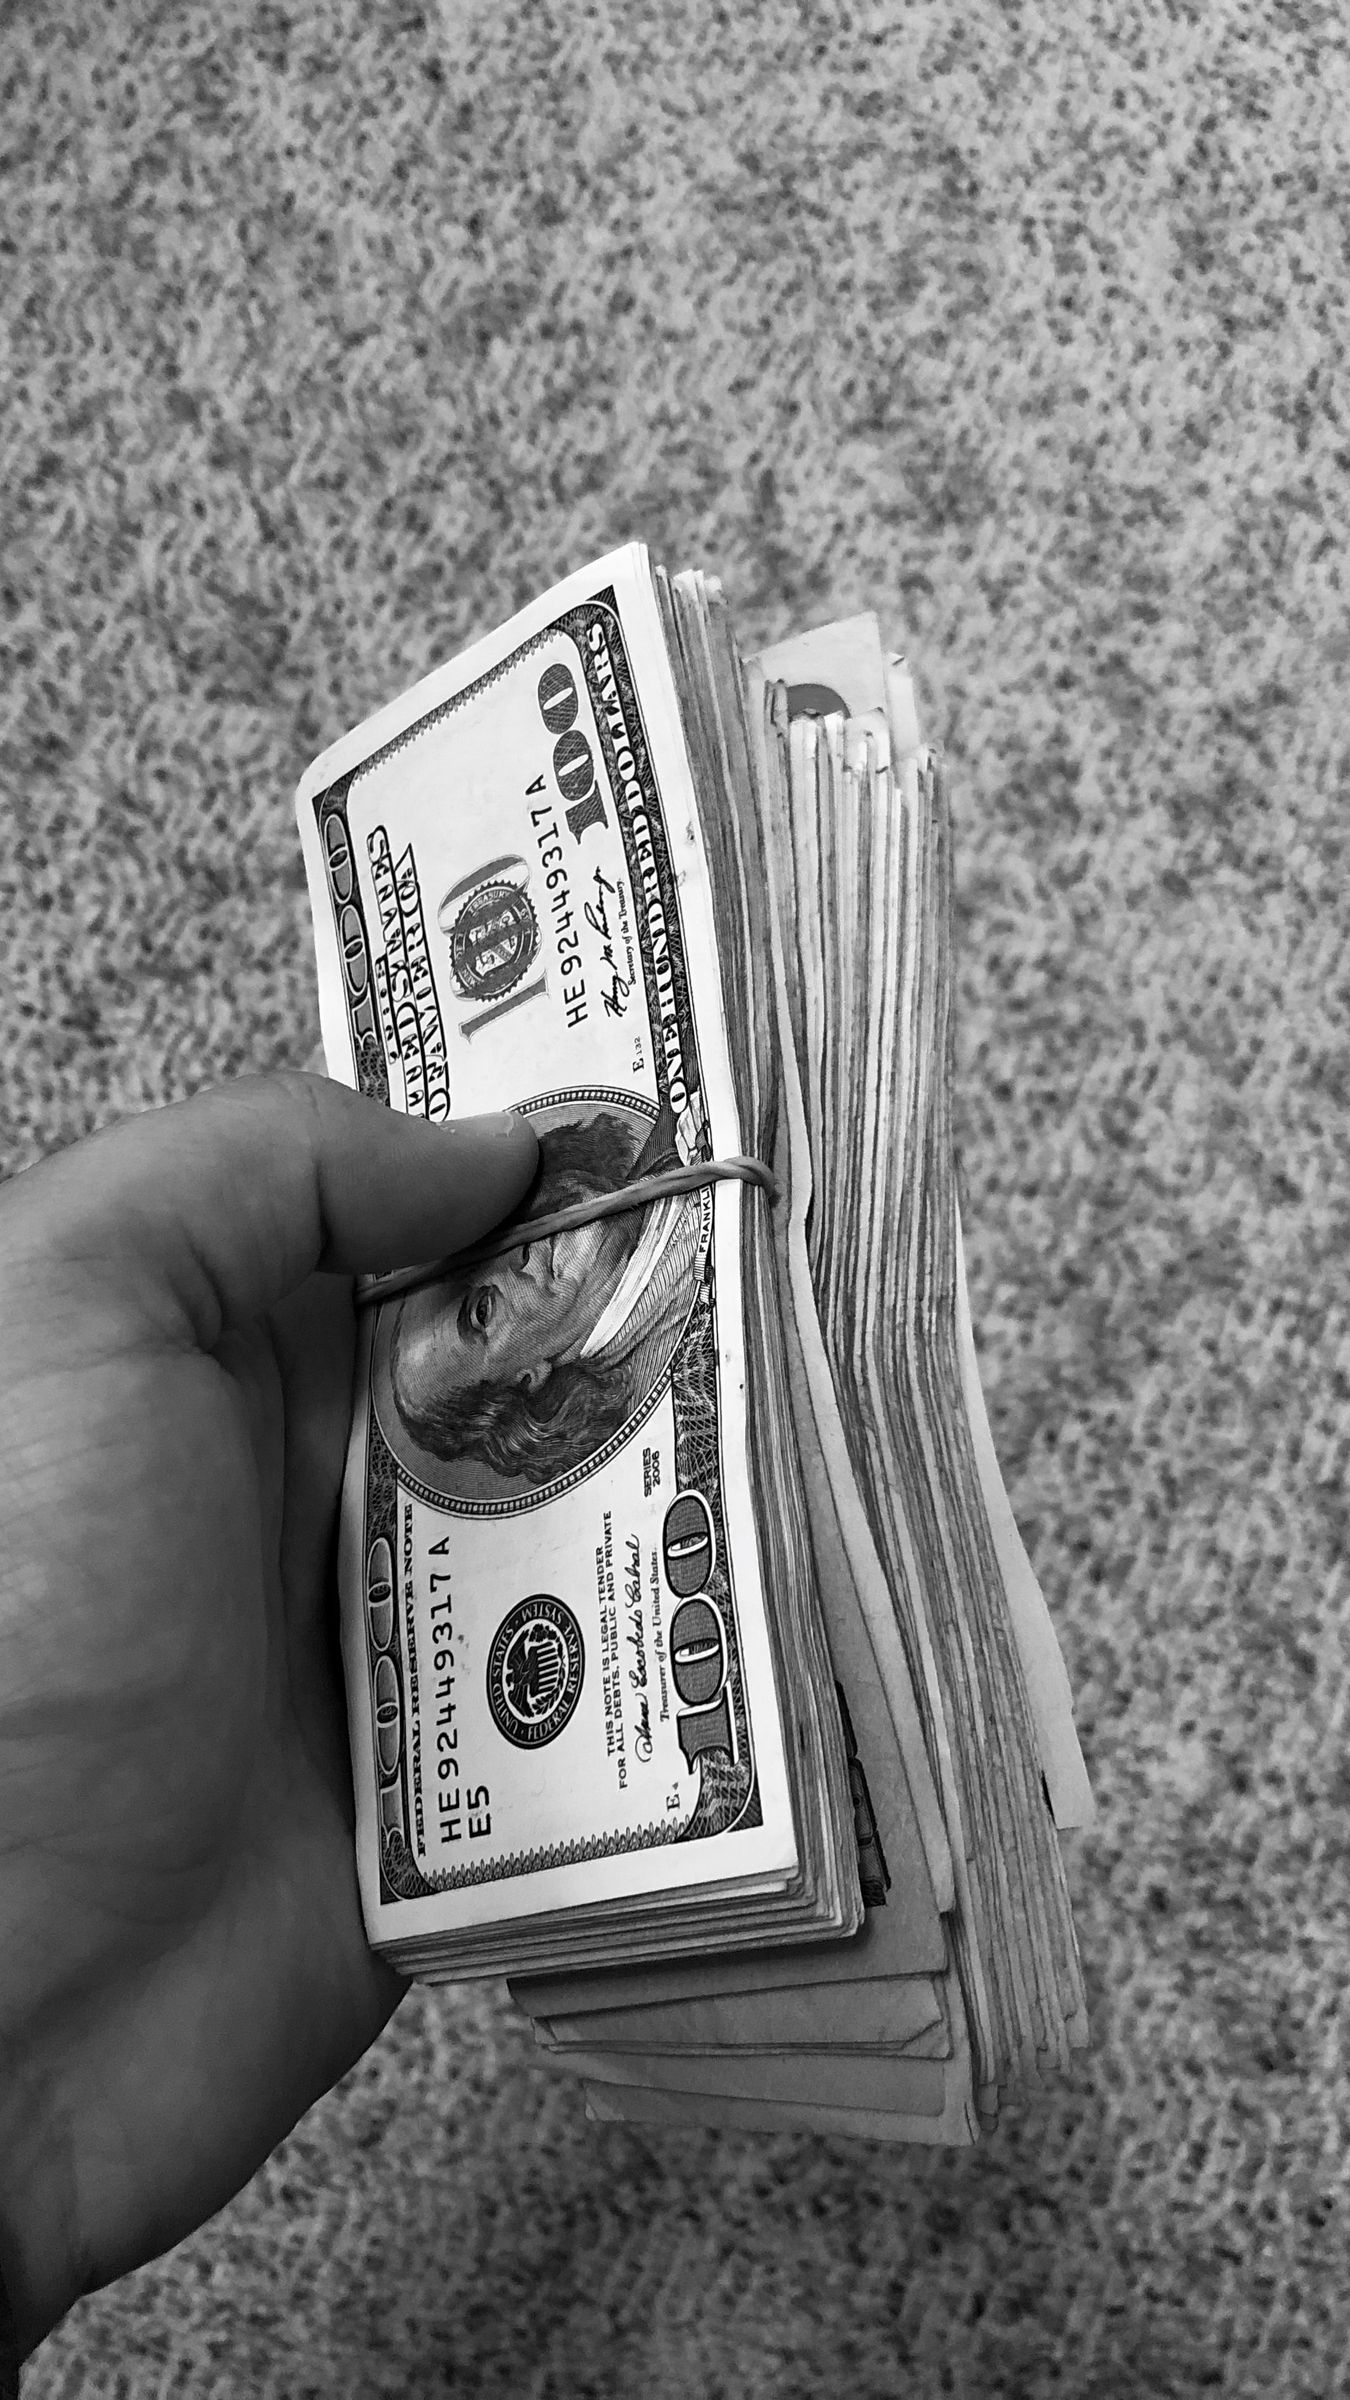 Download wallpaper 1350x2400 money, bills, bw, hand iphone 8+/7+/6s+/for parallax HD background